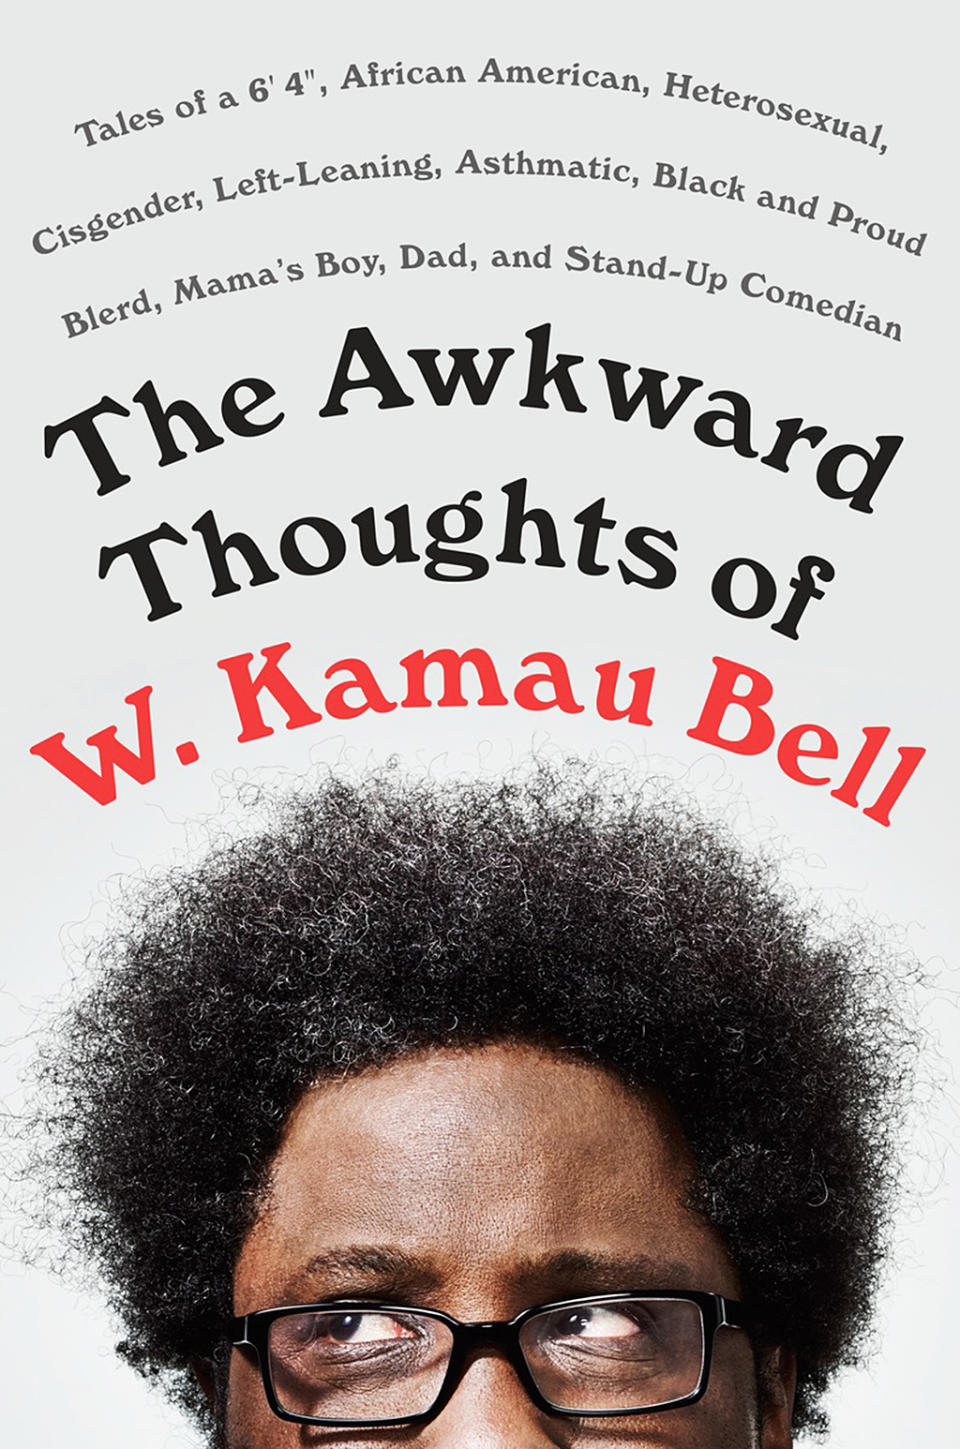 ‘The Awkward Thoughts of W. Kamau Bell: Tales of a 6′ 4″, African American, Heterosexual, Cisgender, Left-Leaning, Asthmatic, Black and Proud Blerd, Mama’s Boy, Dad, and Stand-Up Comedian’ by W. Kamau Bell